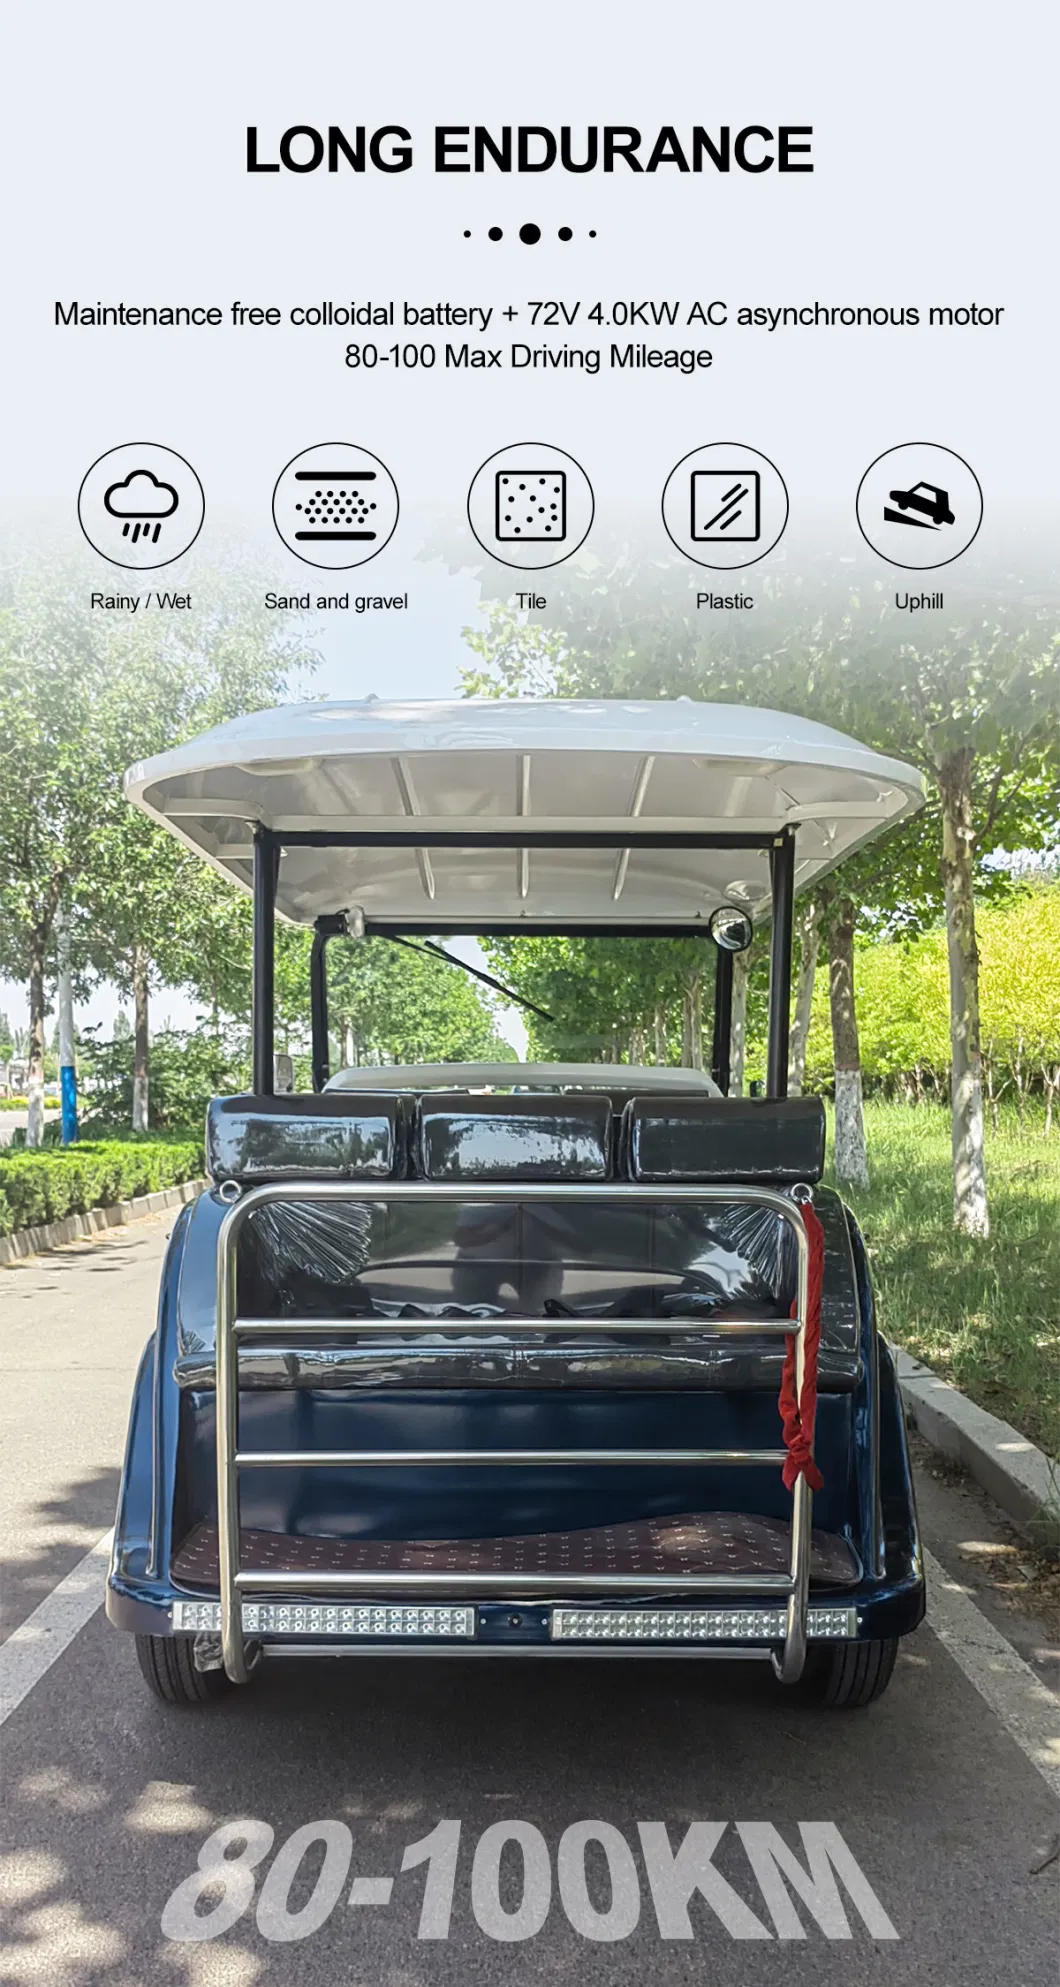 Best Free Color Custom 8 Seats Tourist EV Transport Sightseeing Vintage Bus Utility Vehicle Tour Electric Motorized Power Classic Retro Car Price for Sale